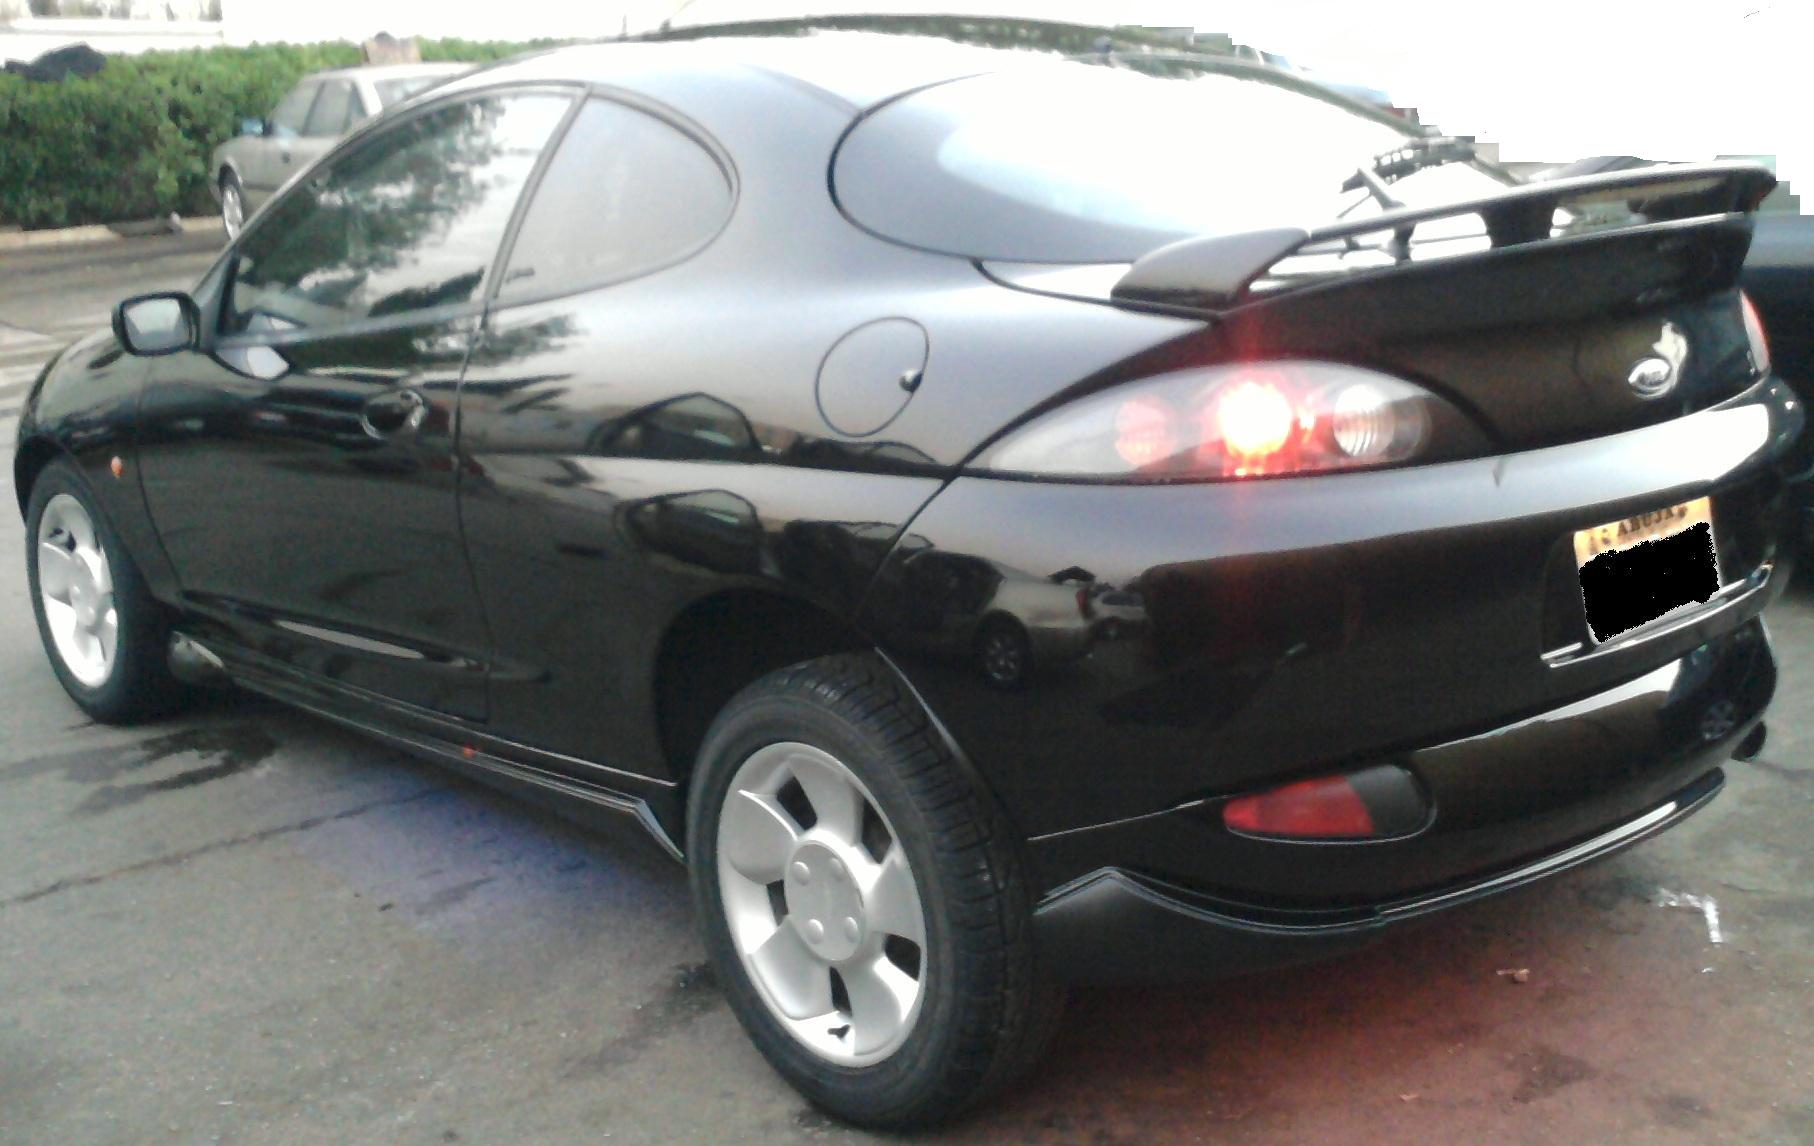 Ford Puma- Do You Have One Or Know Someone That Has One? I Need The Spare  Parts - Autos - Nigeria